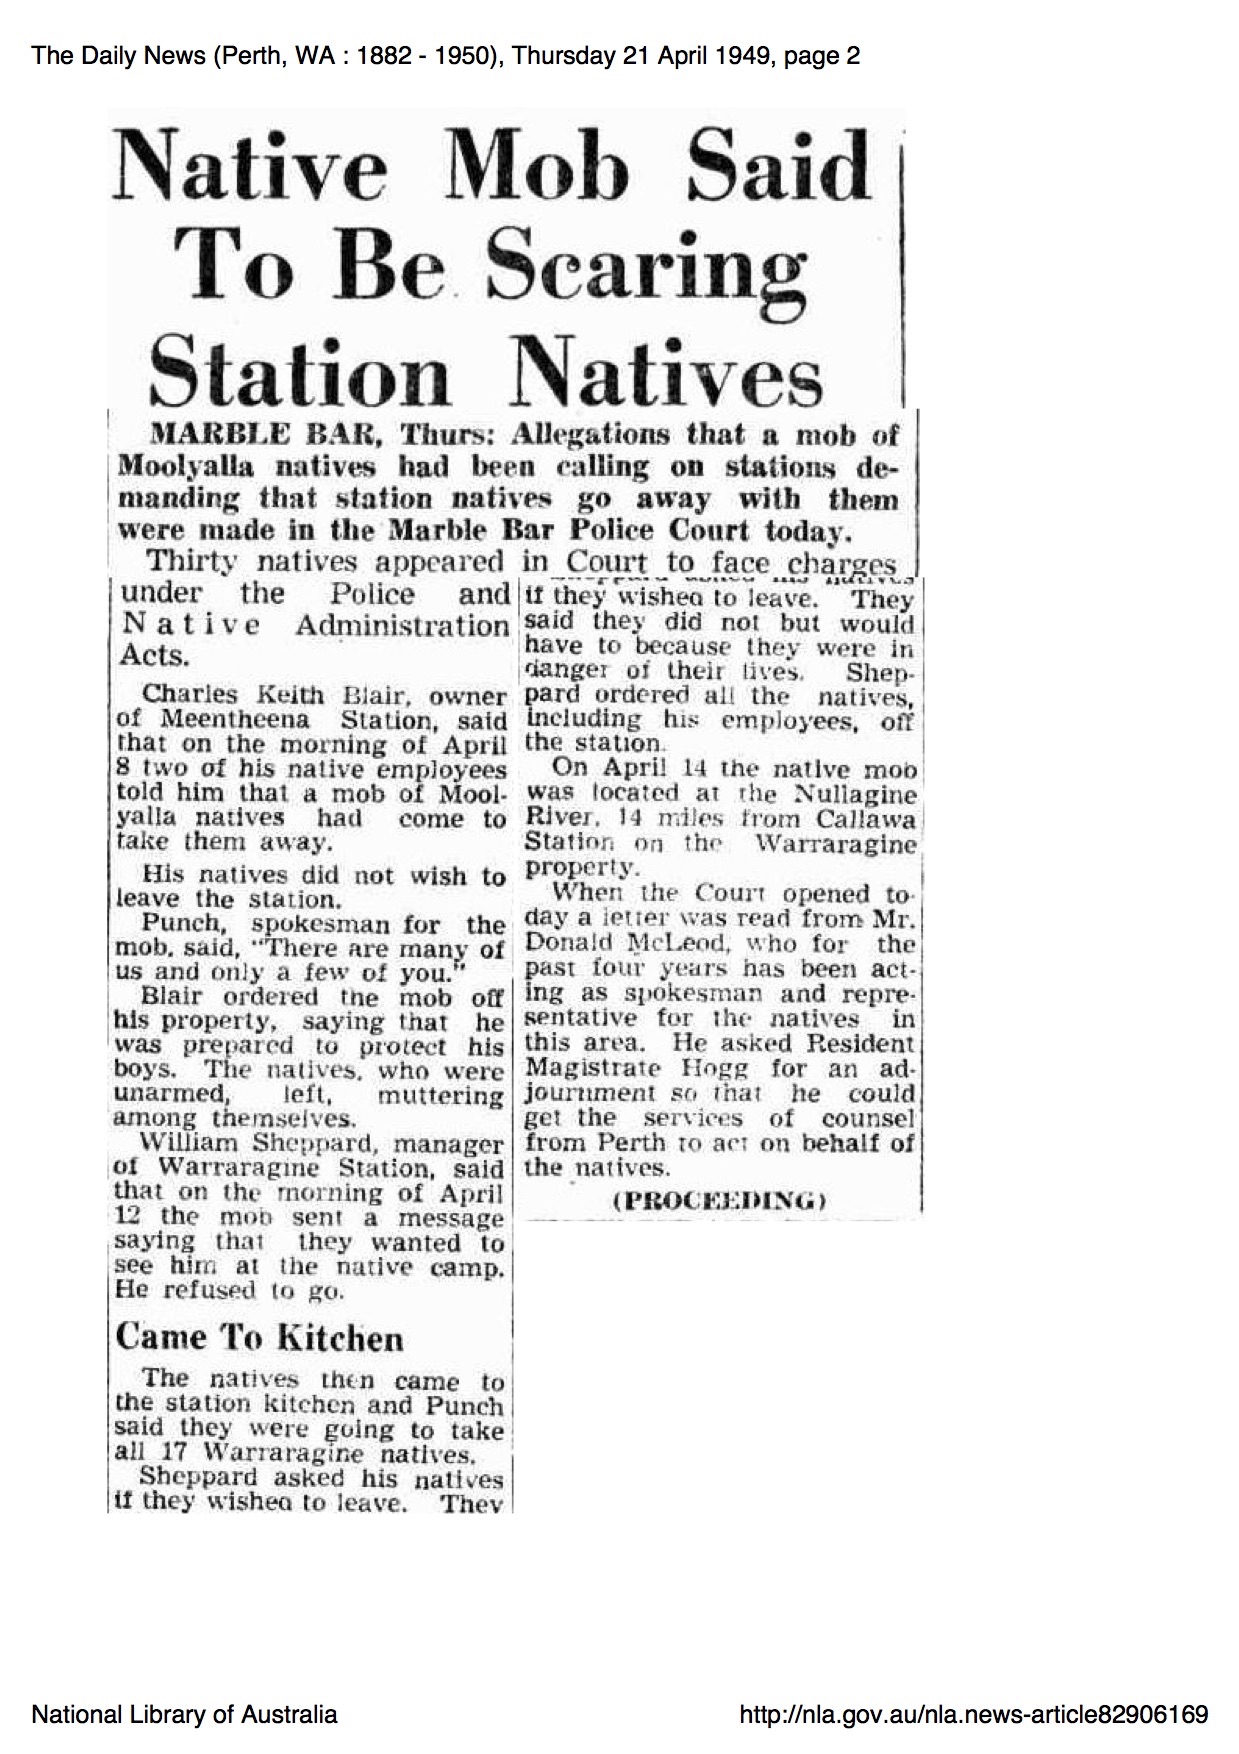 Native Mob Said to be Scaring Station Natives newspaper article